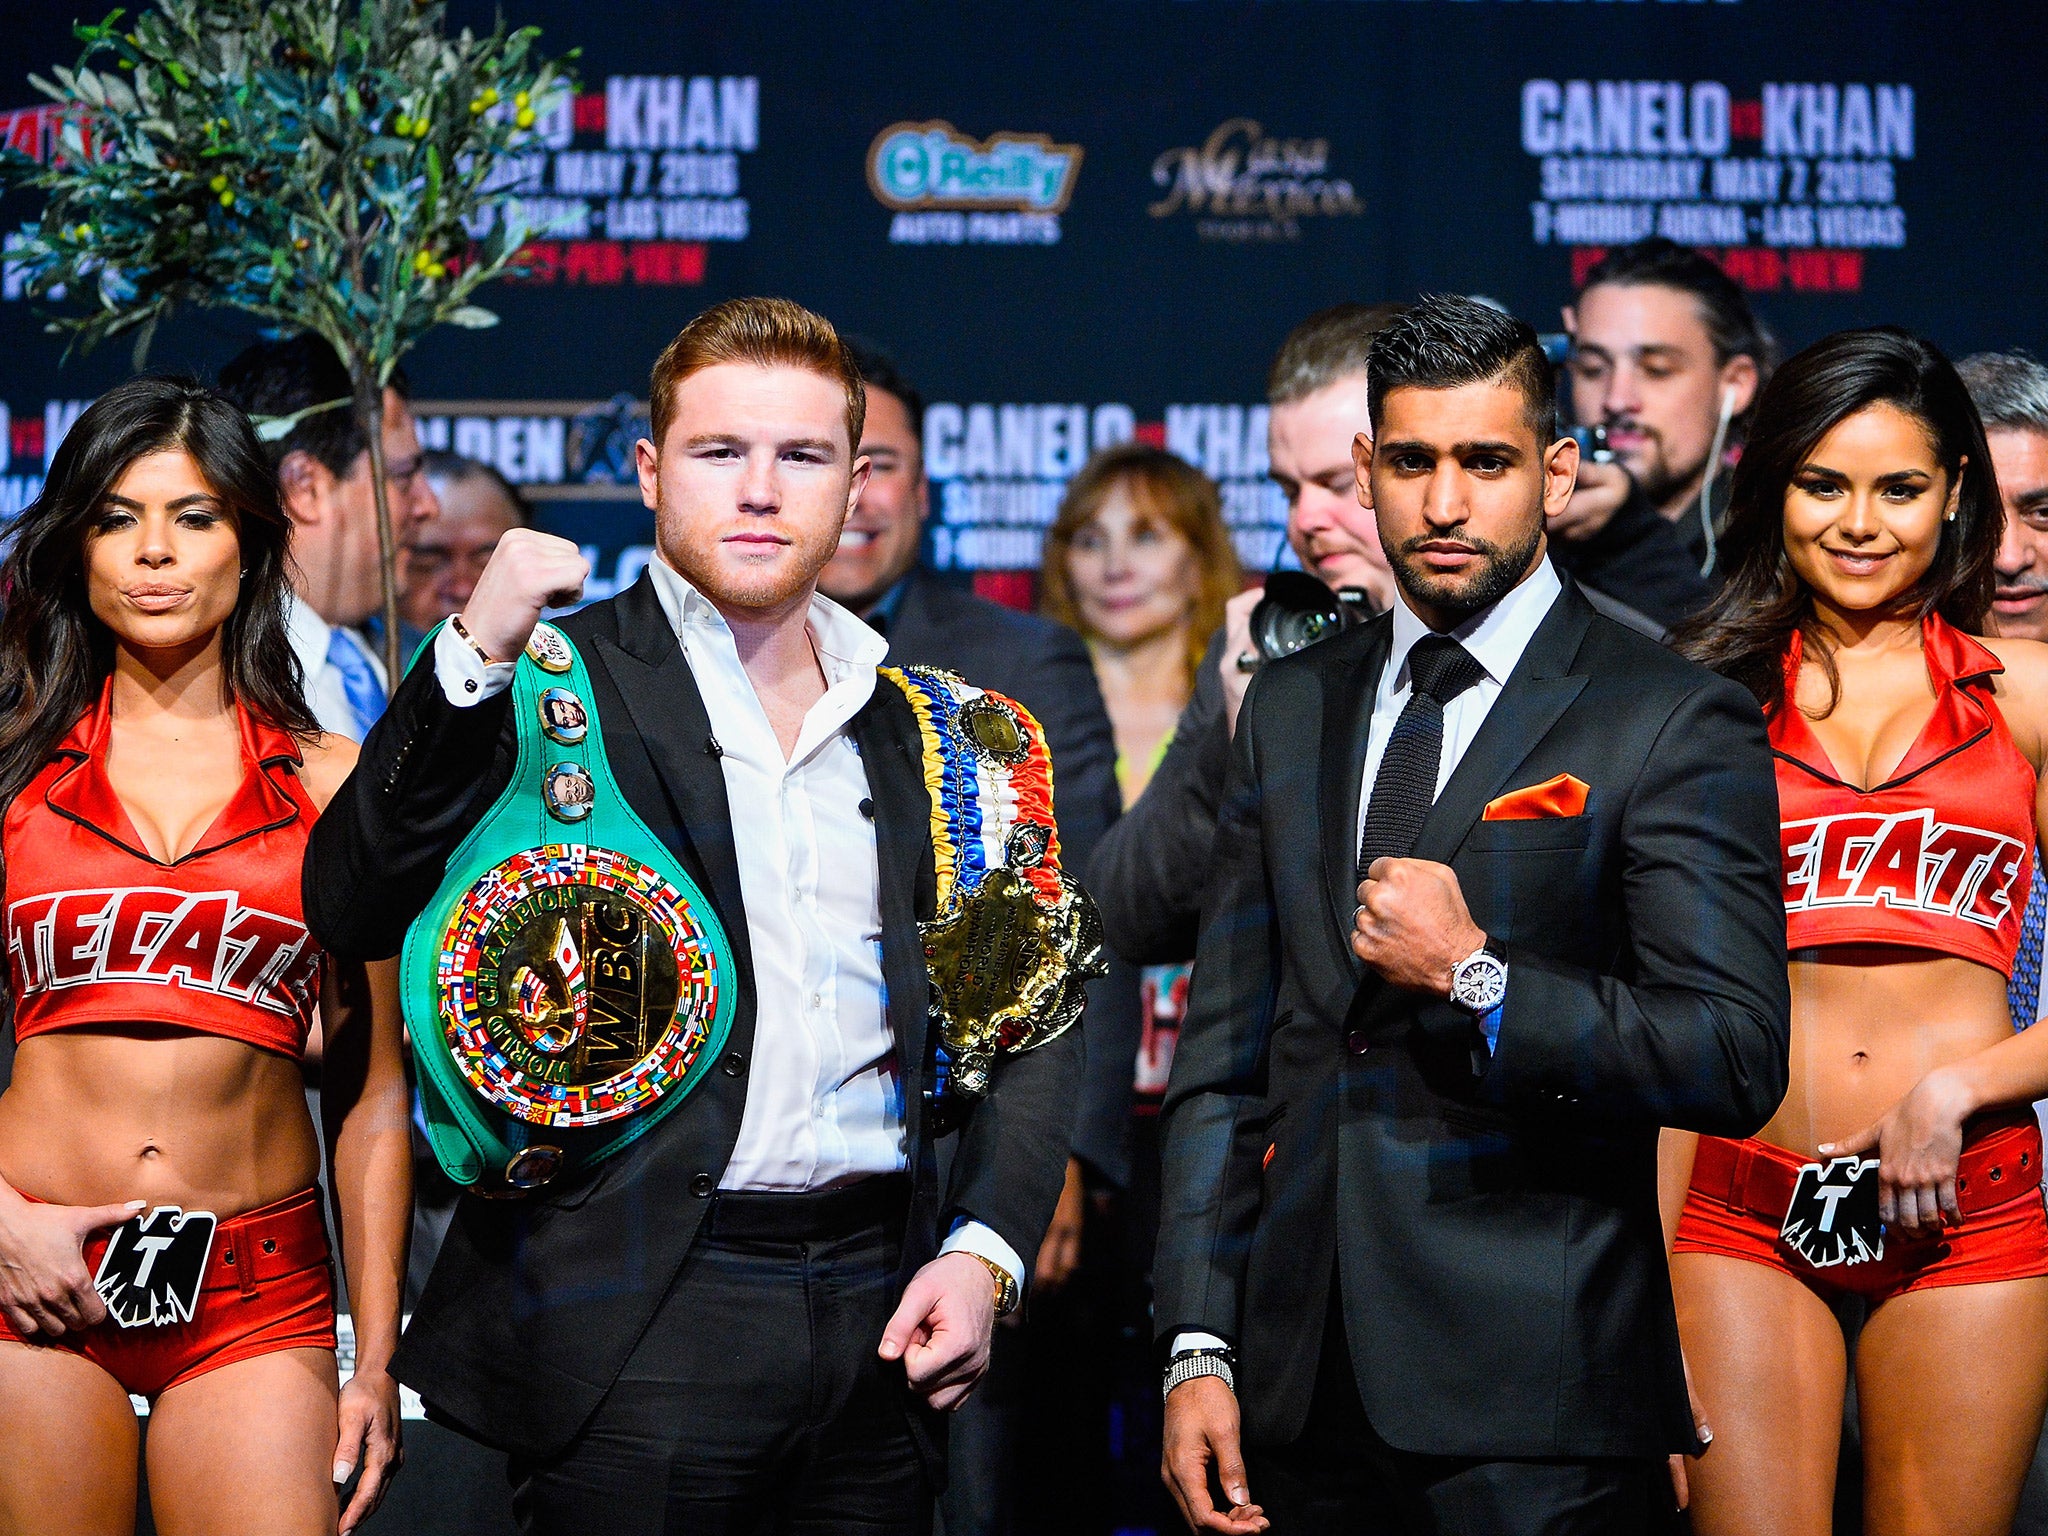 Saul Alvarez and Amir Khan fight for the WBC middleweight title in Las Vegas tonight